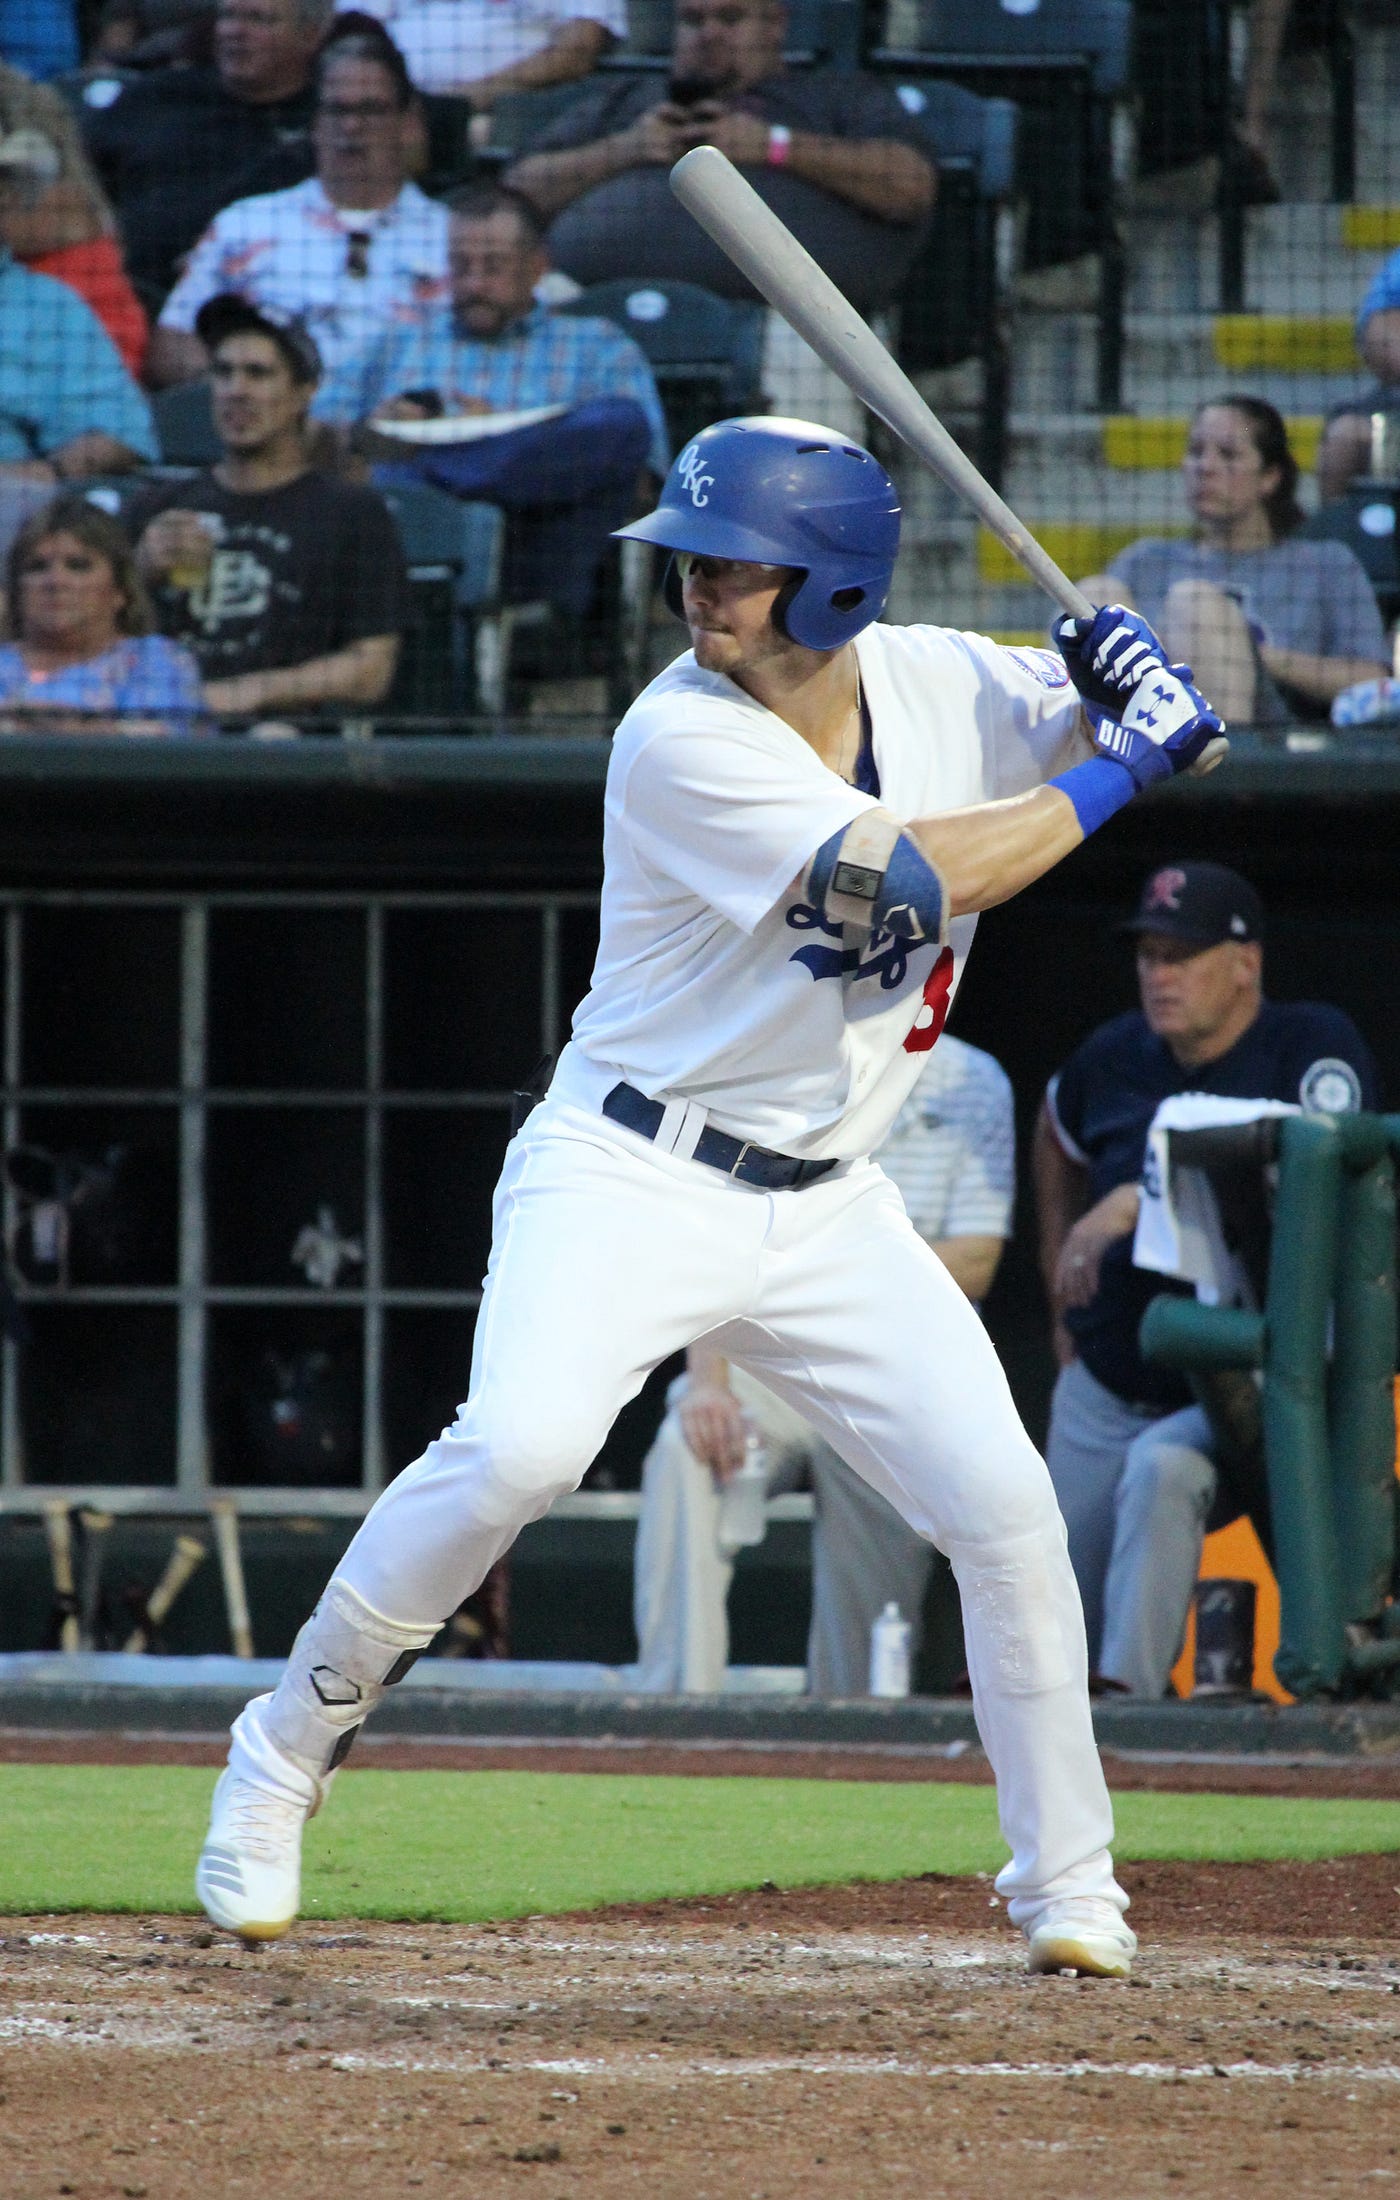 Gavin Lux Named Baseball America Minor League Player of the Year, by Lisa  Johnson, Beyond the Bricks